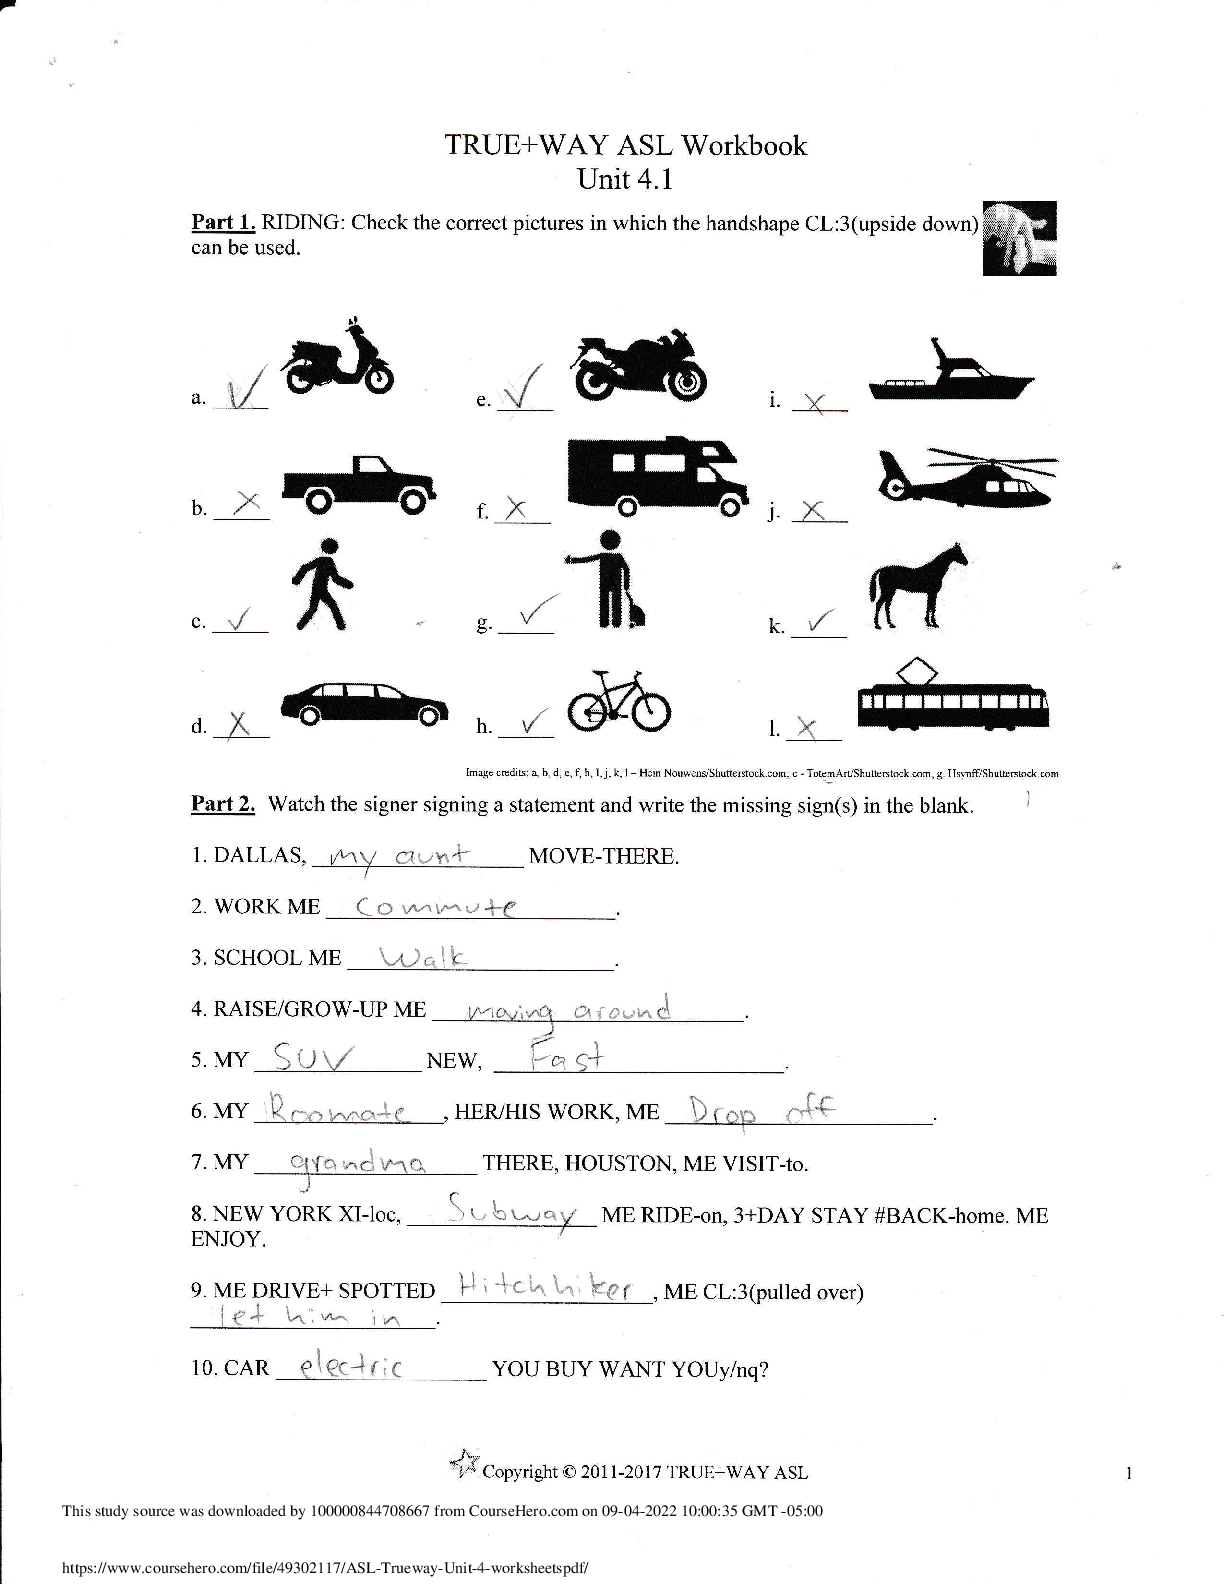 ASL Trueway Unit 2 Worksheet Complete Solution All Answers Correct